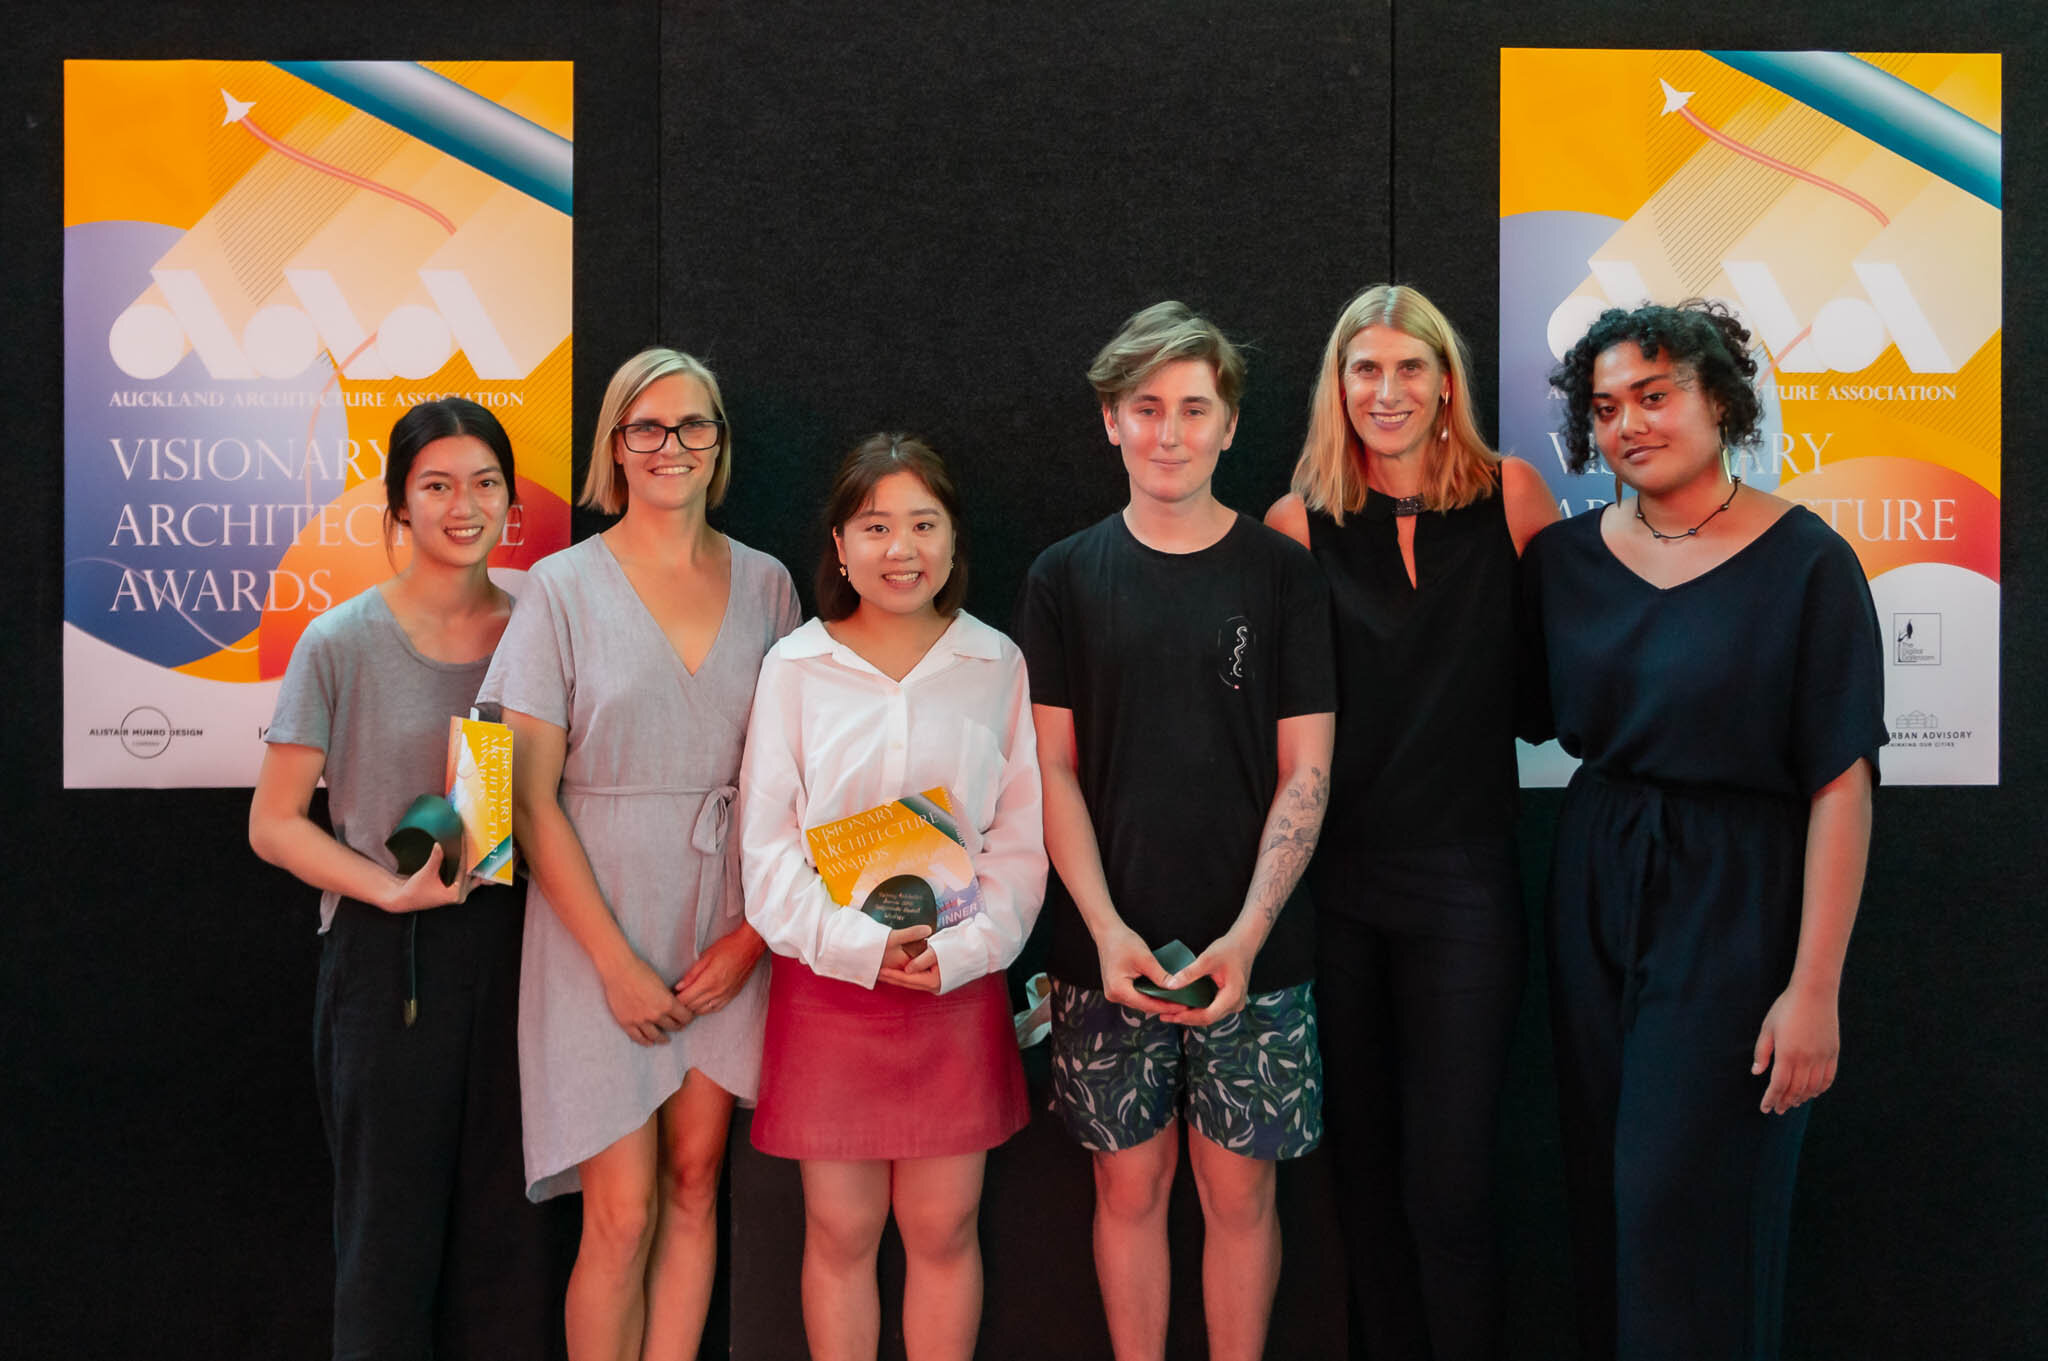  Category Winners and Judges, L to R: Nicole Teh (PG, Supreme), Felicity Brenchley (J), Jingyuan Huang (UG), William King (WIP), Gina Hochstein (J), Icao Tiseli (J) 